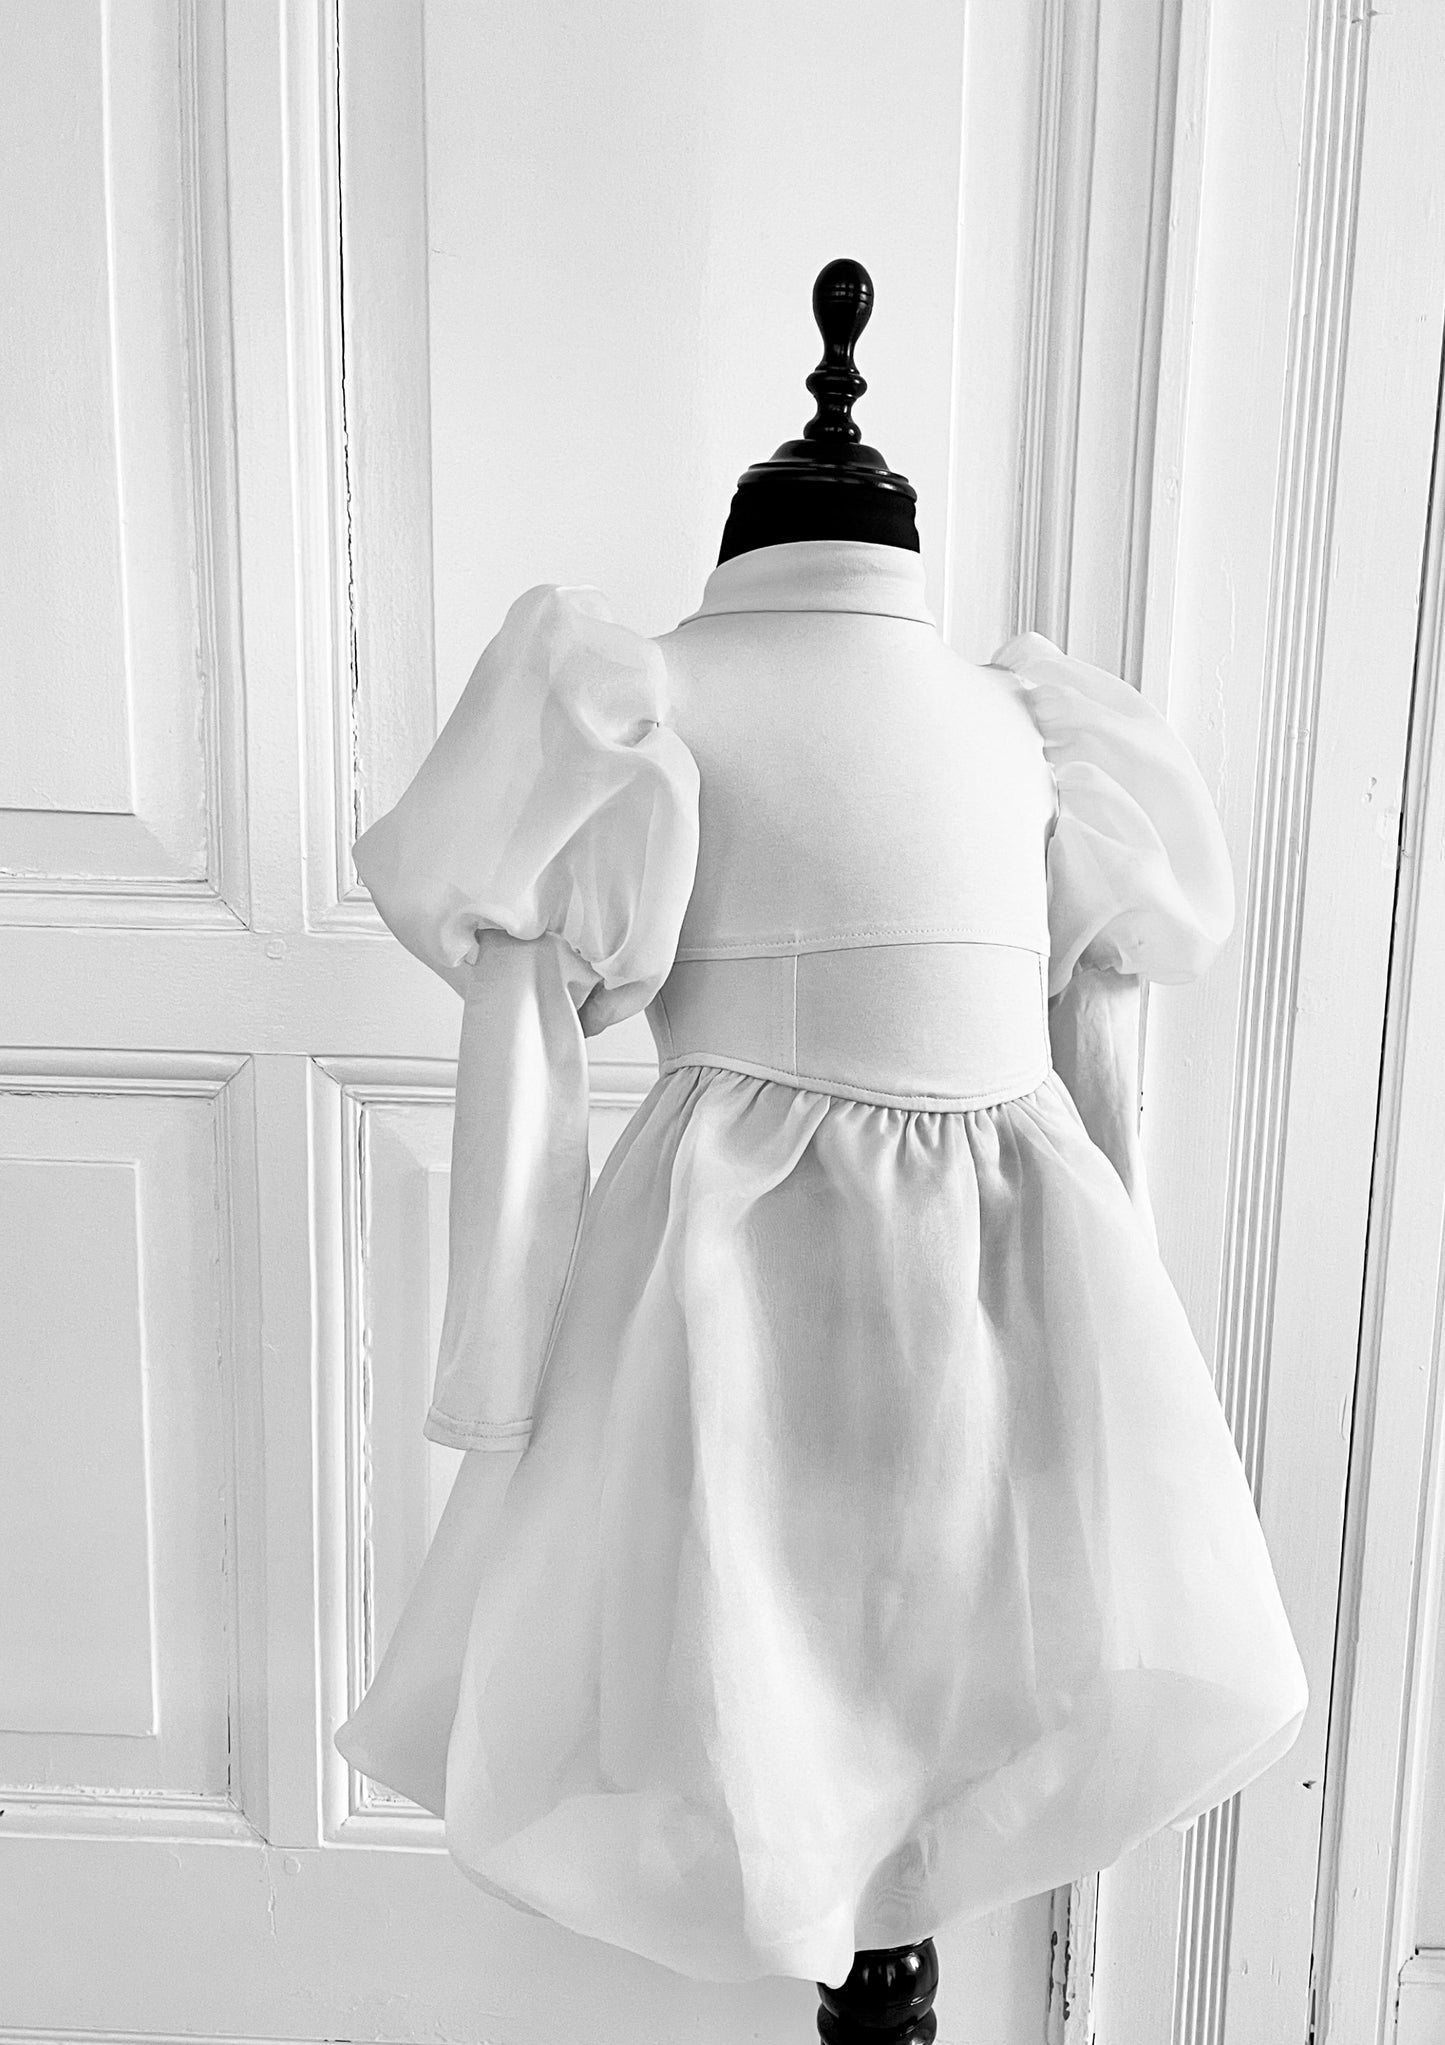 DOLLY WORLD PUFF LONG SLEEVE BALLOON ORGANZA DRESS WITH COTTON BODY white